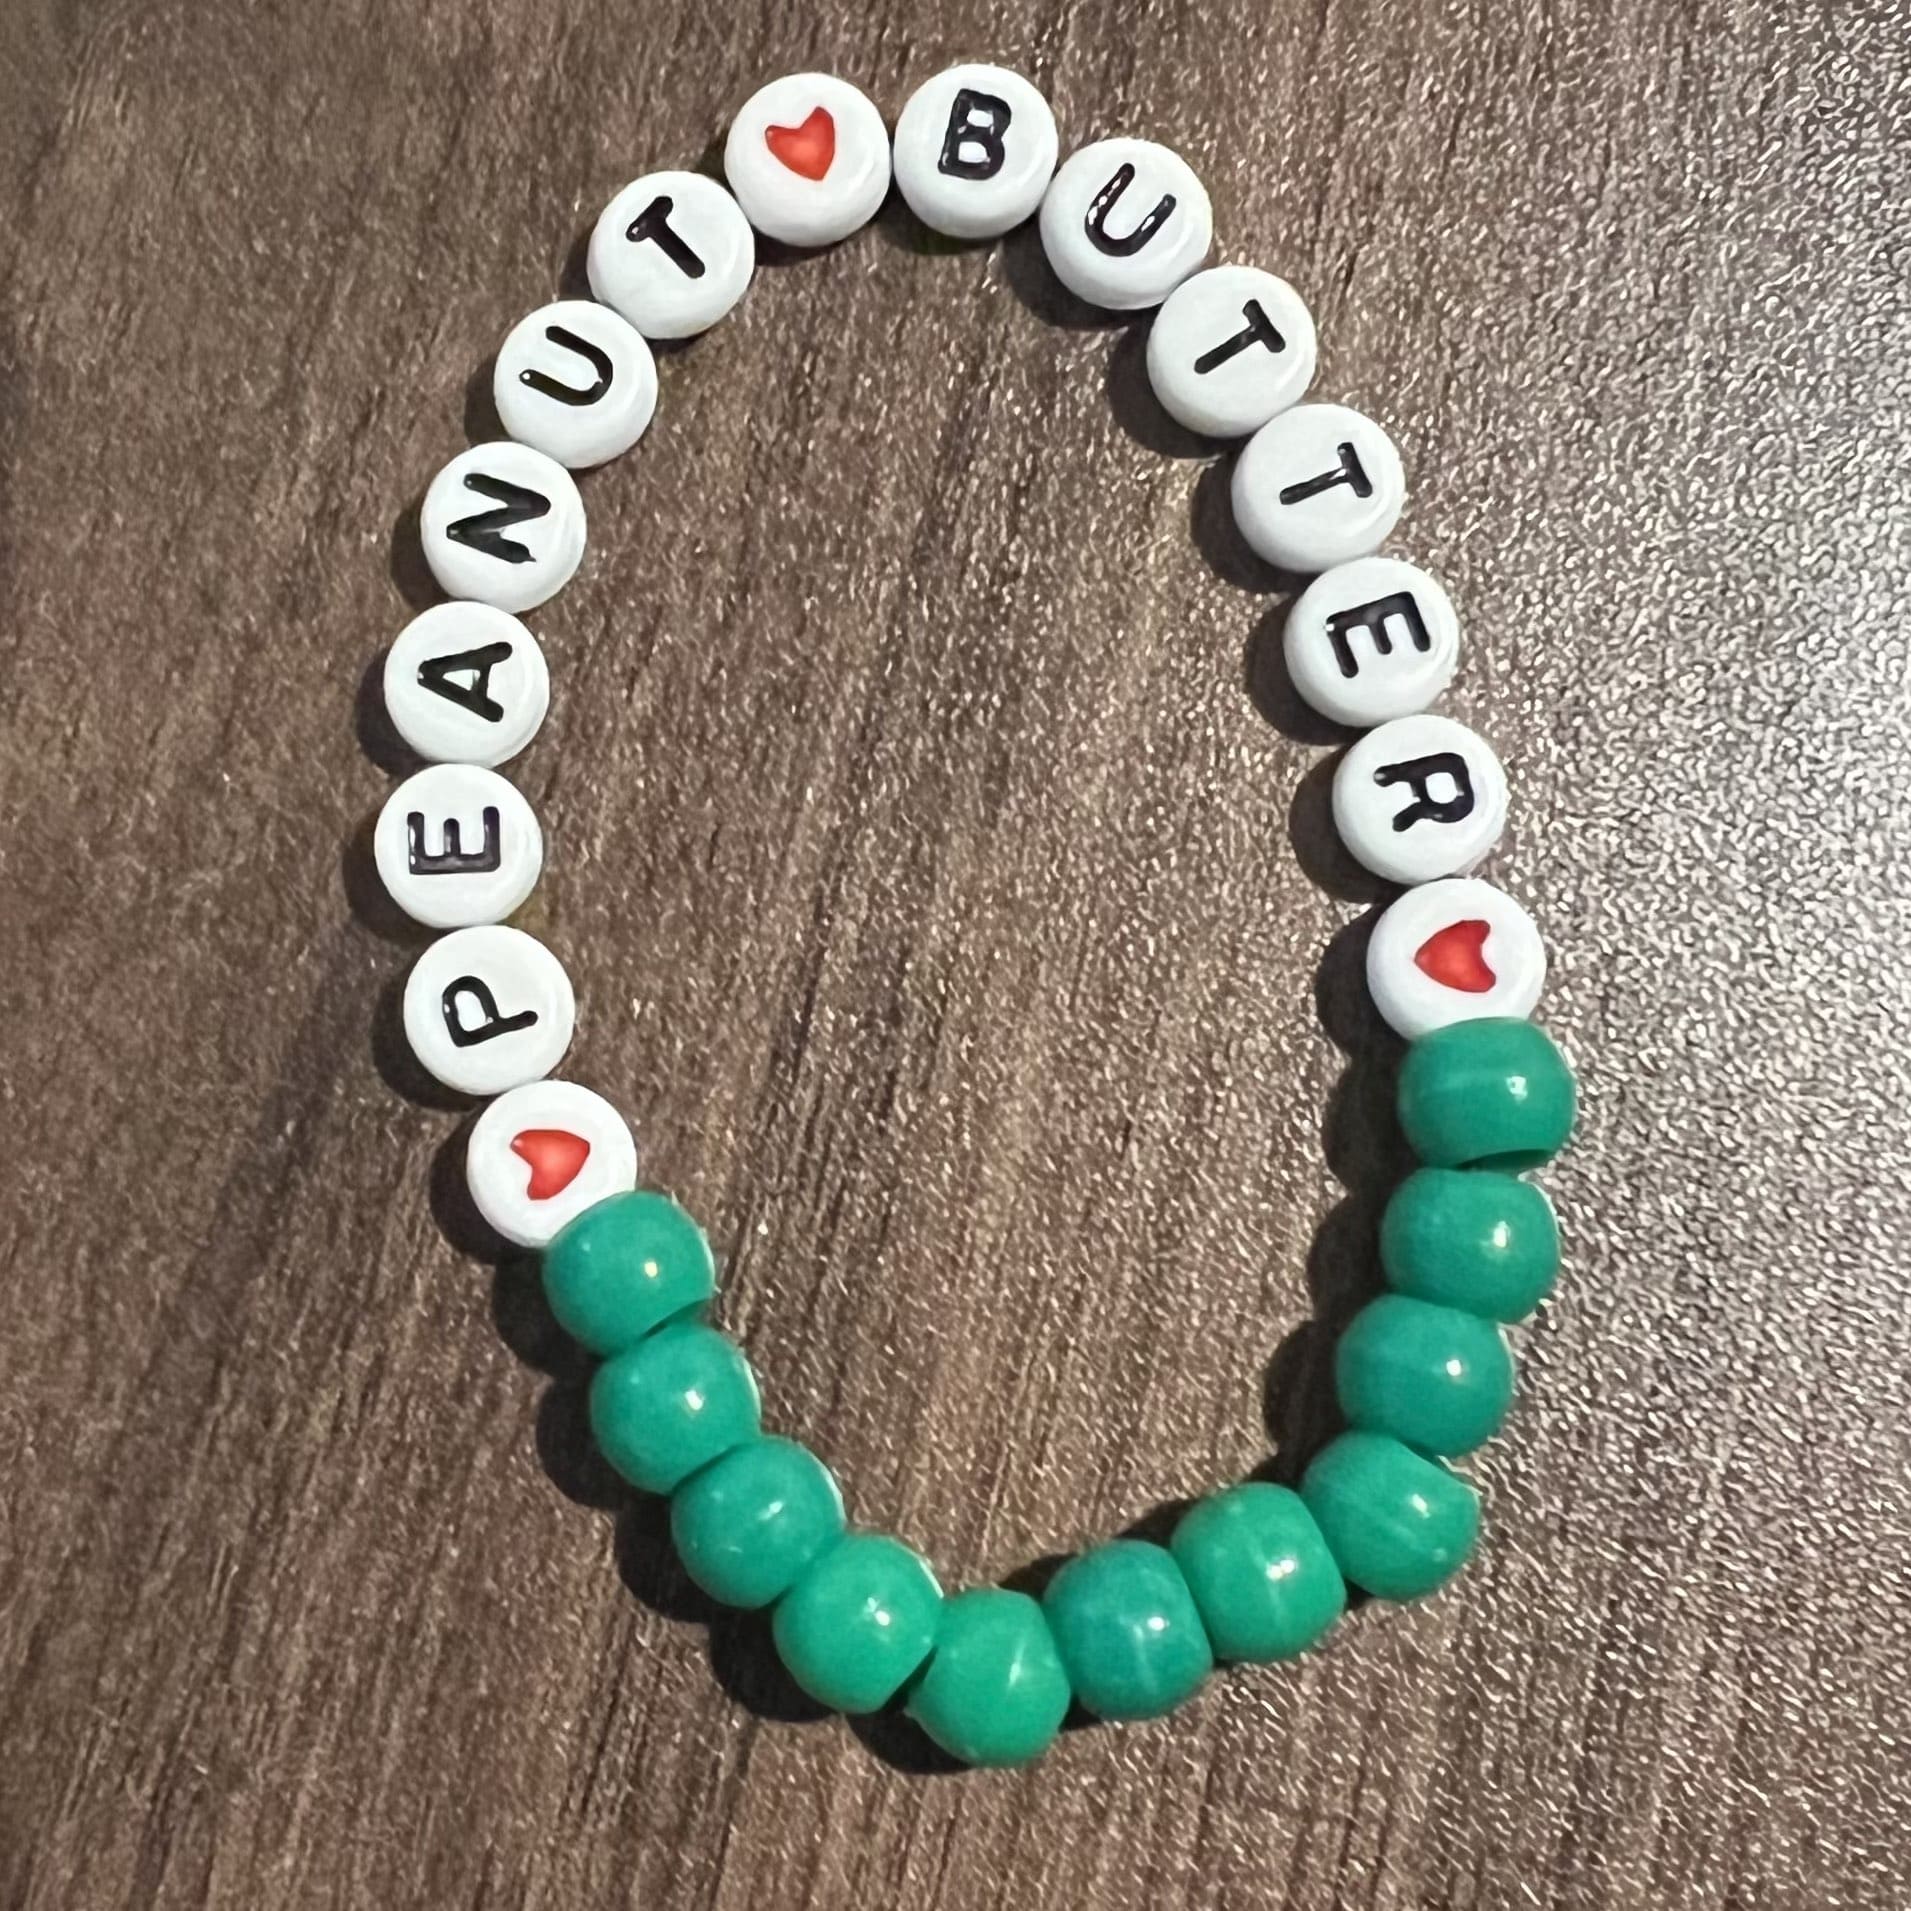 bracelet with green beads, heart beads, and beads that read 'peanut butter'